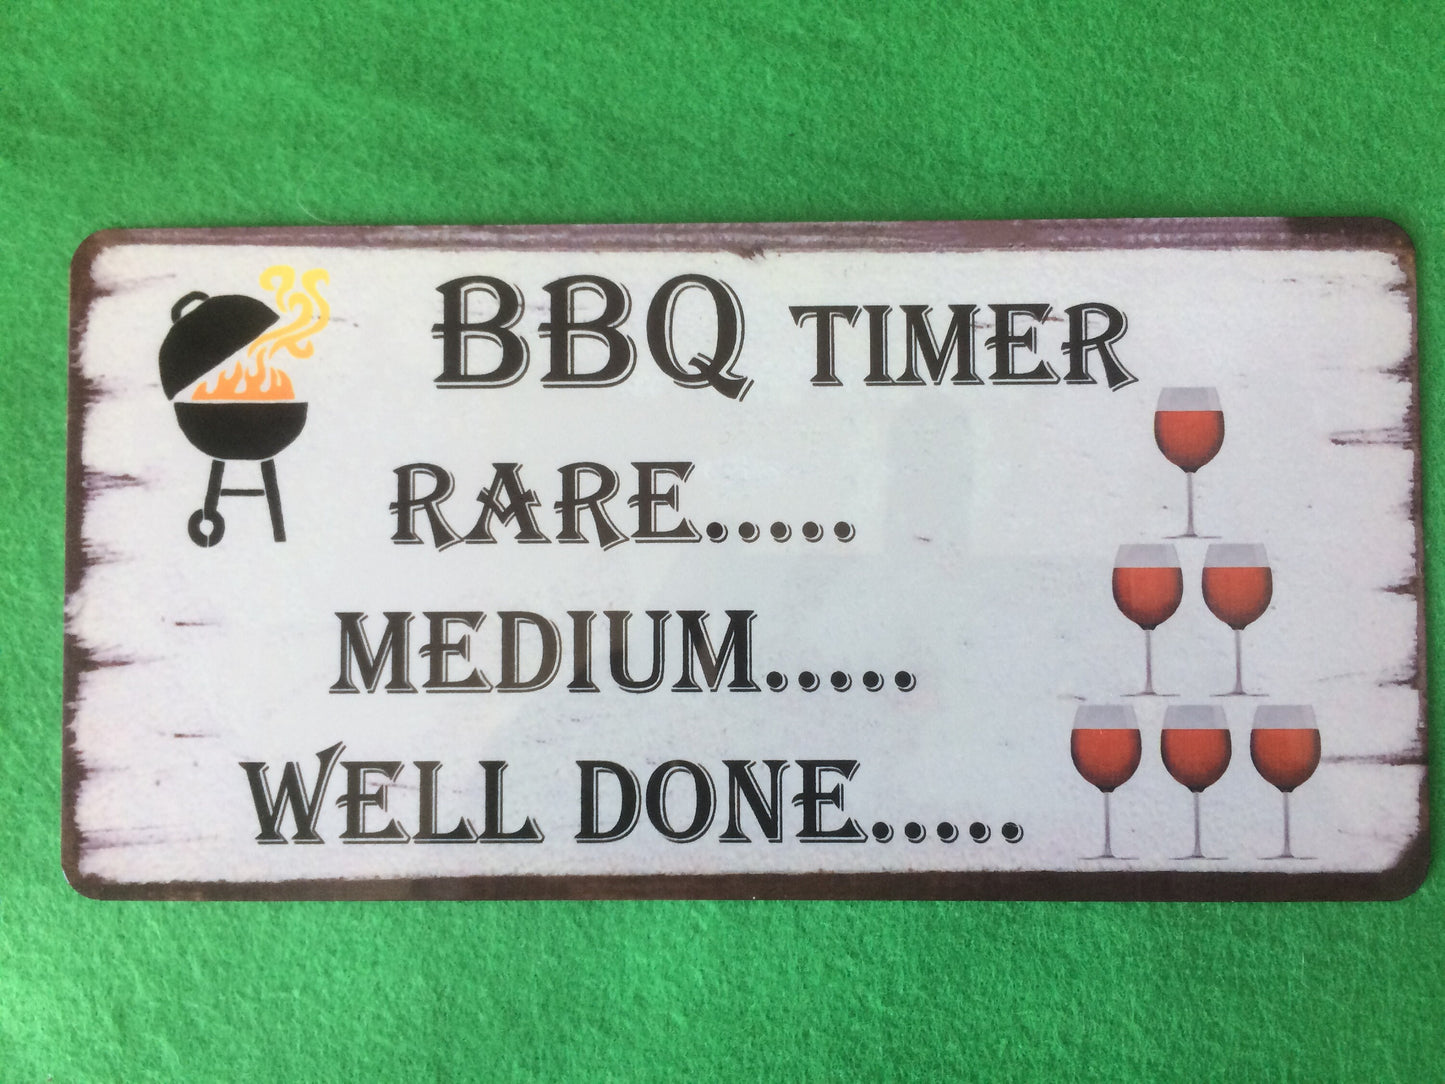 BBQ Cooking Timer Sign / Plaque Wine Drinking Fun Garden Idea Present or Gift